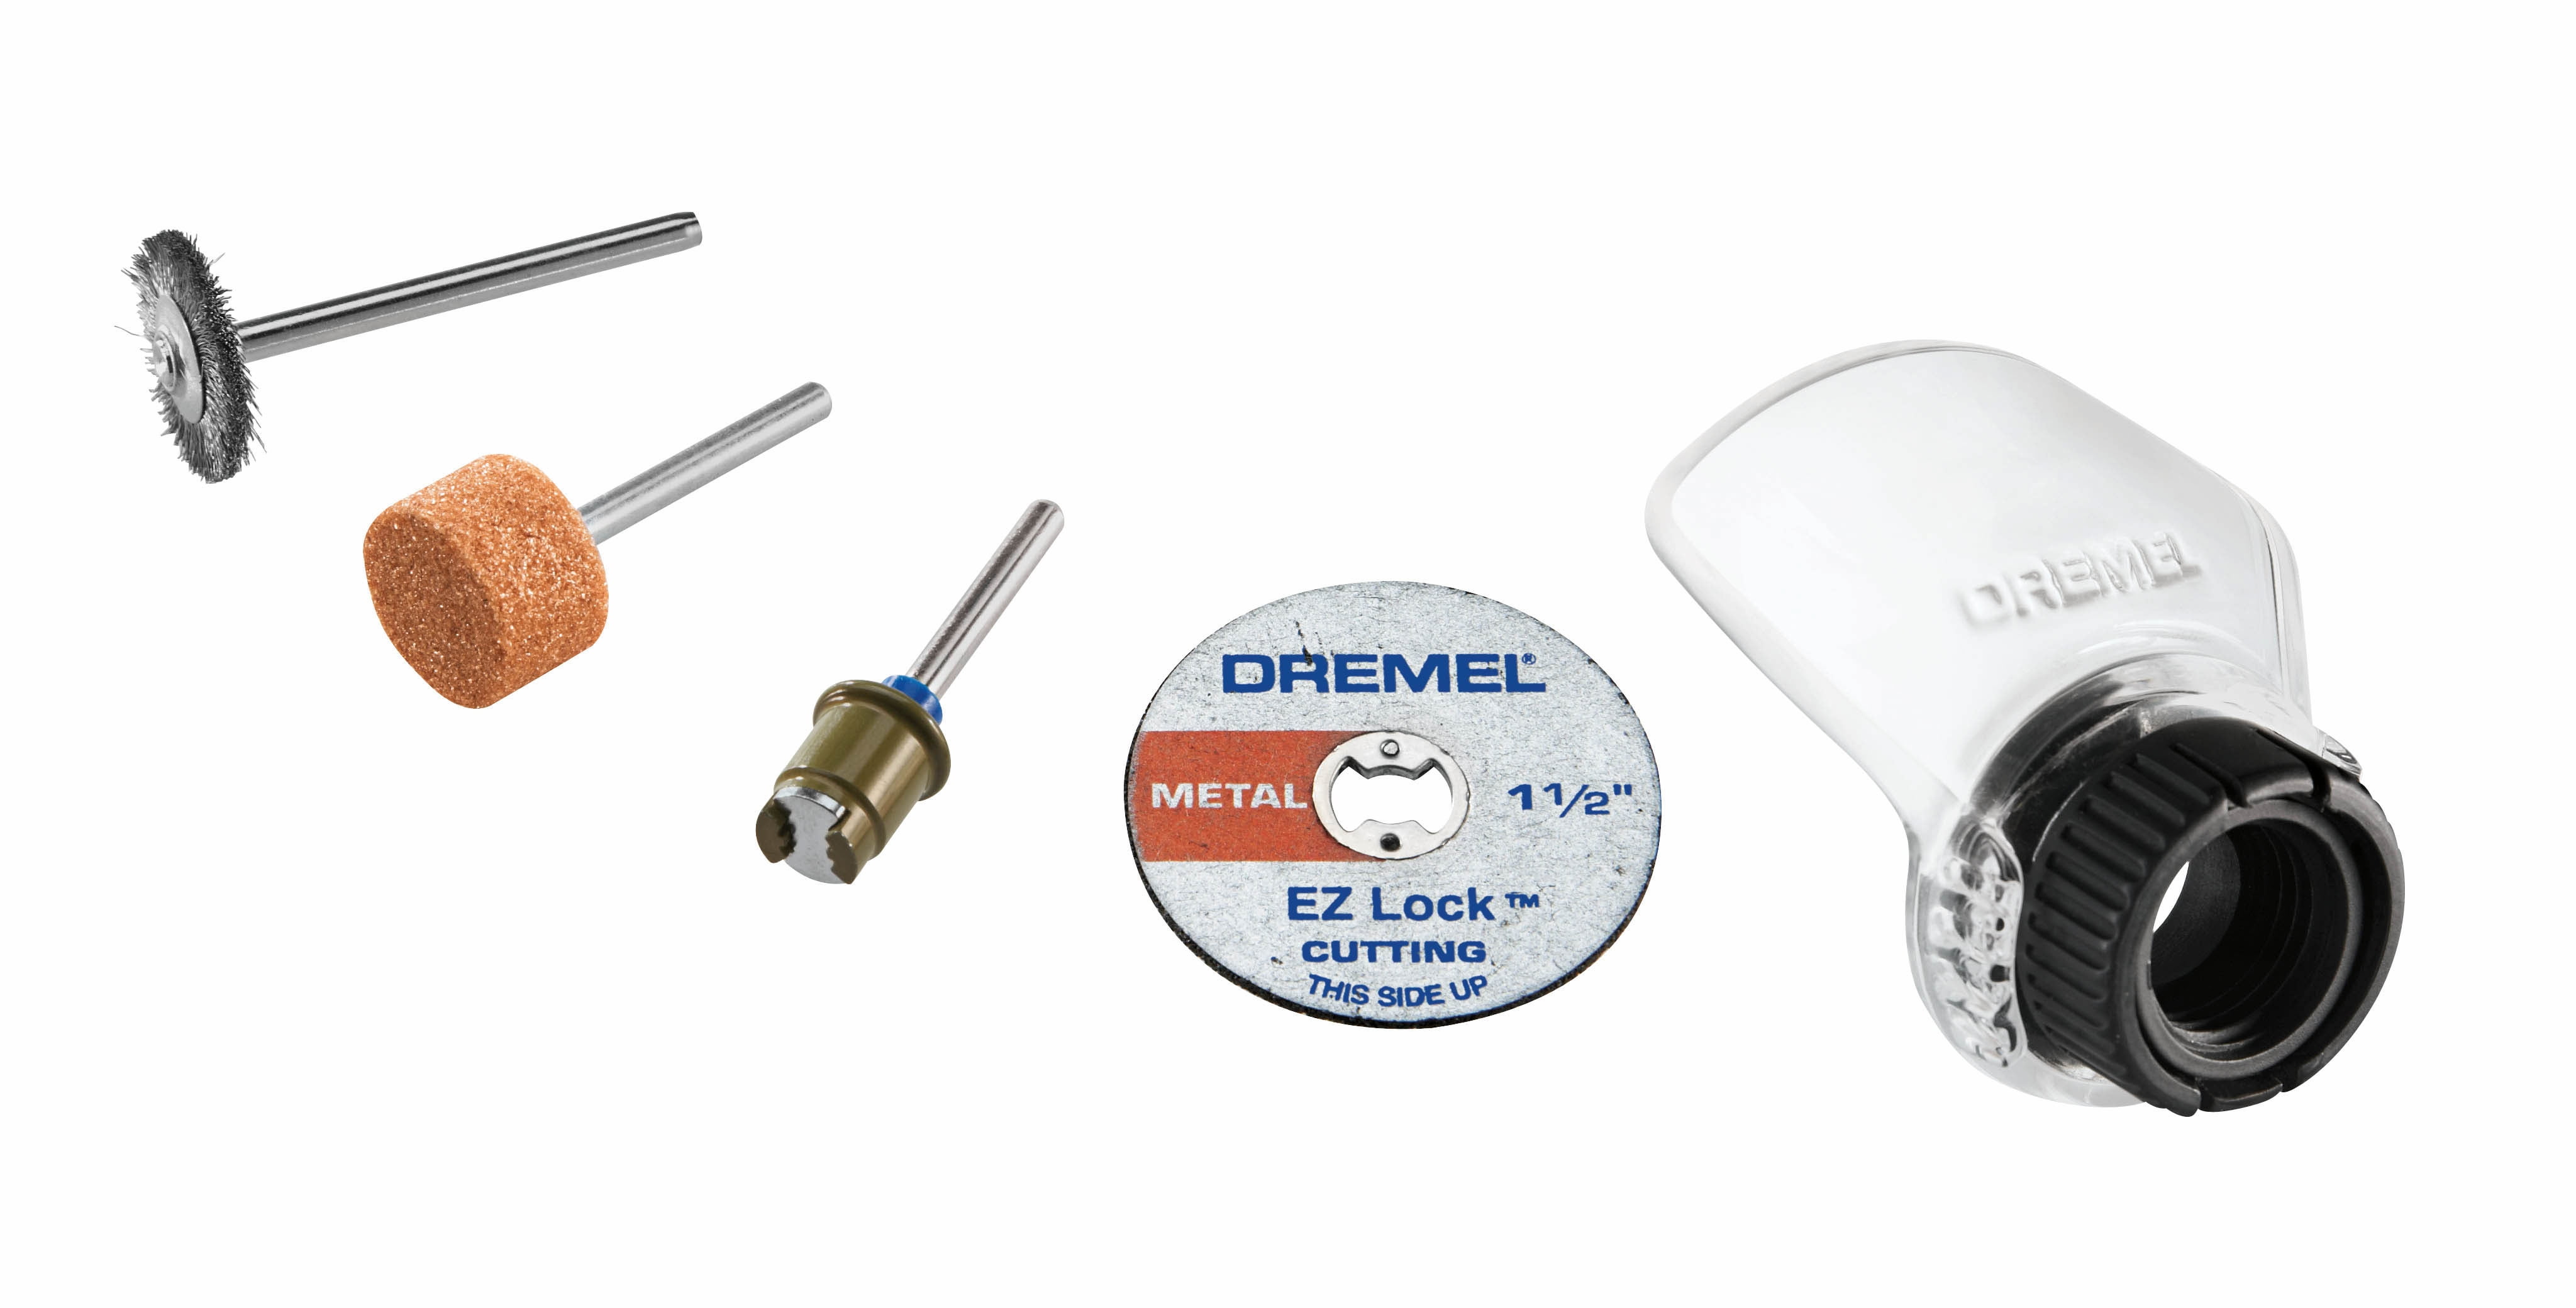 Dremel A550 Rotary Tool Shield Attachment Kit with 4 Accessories